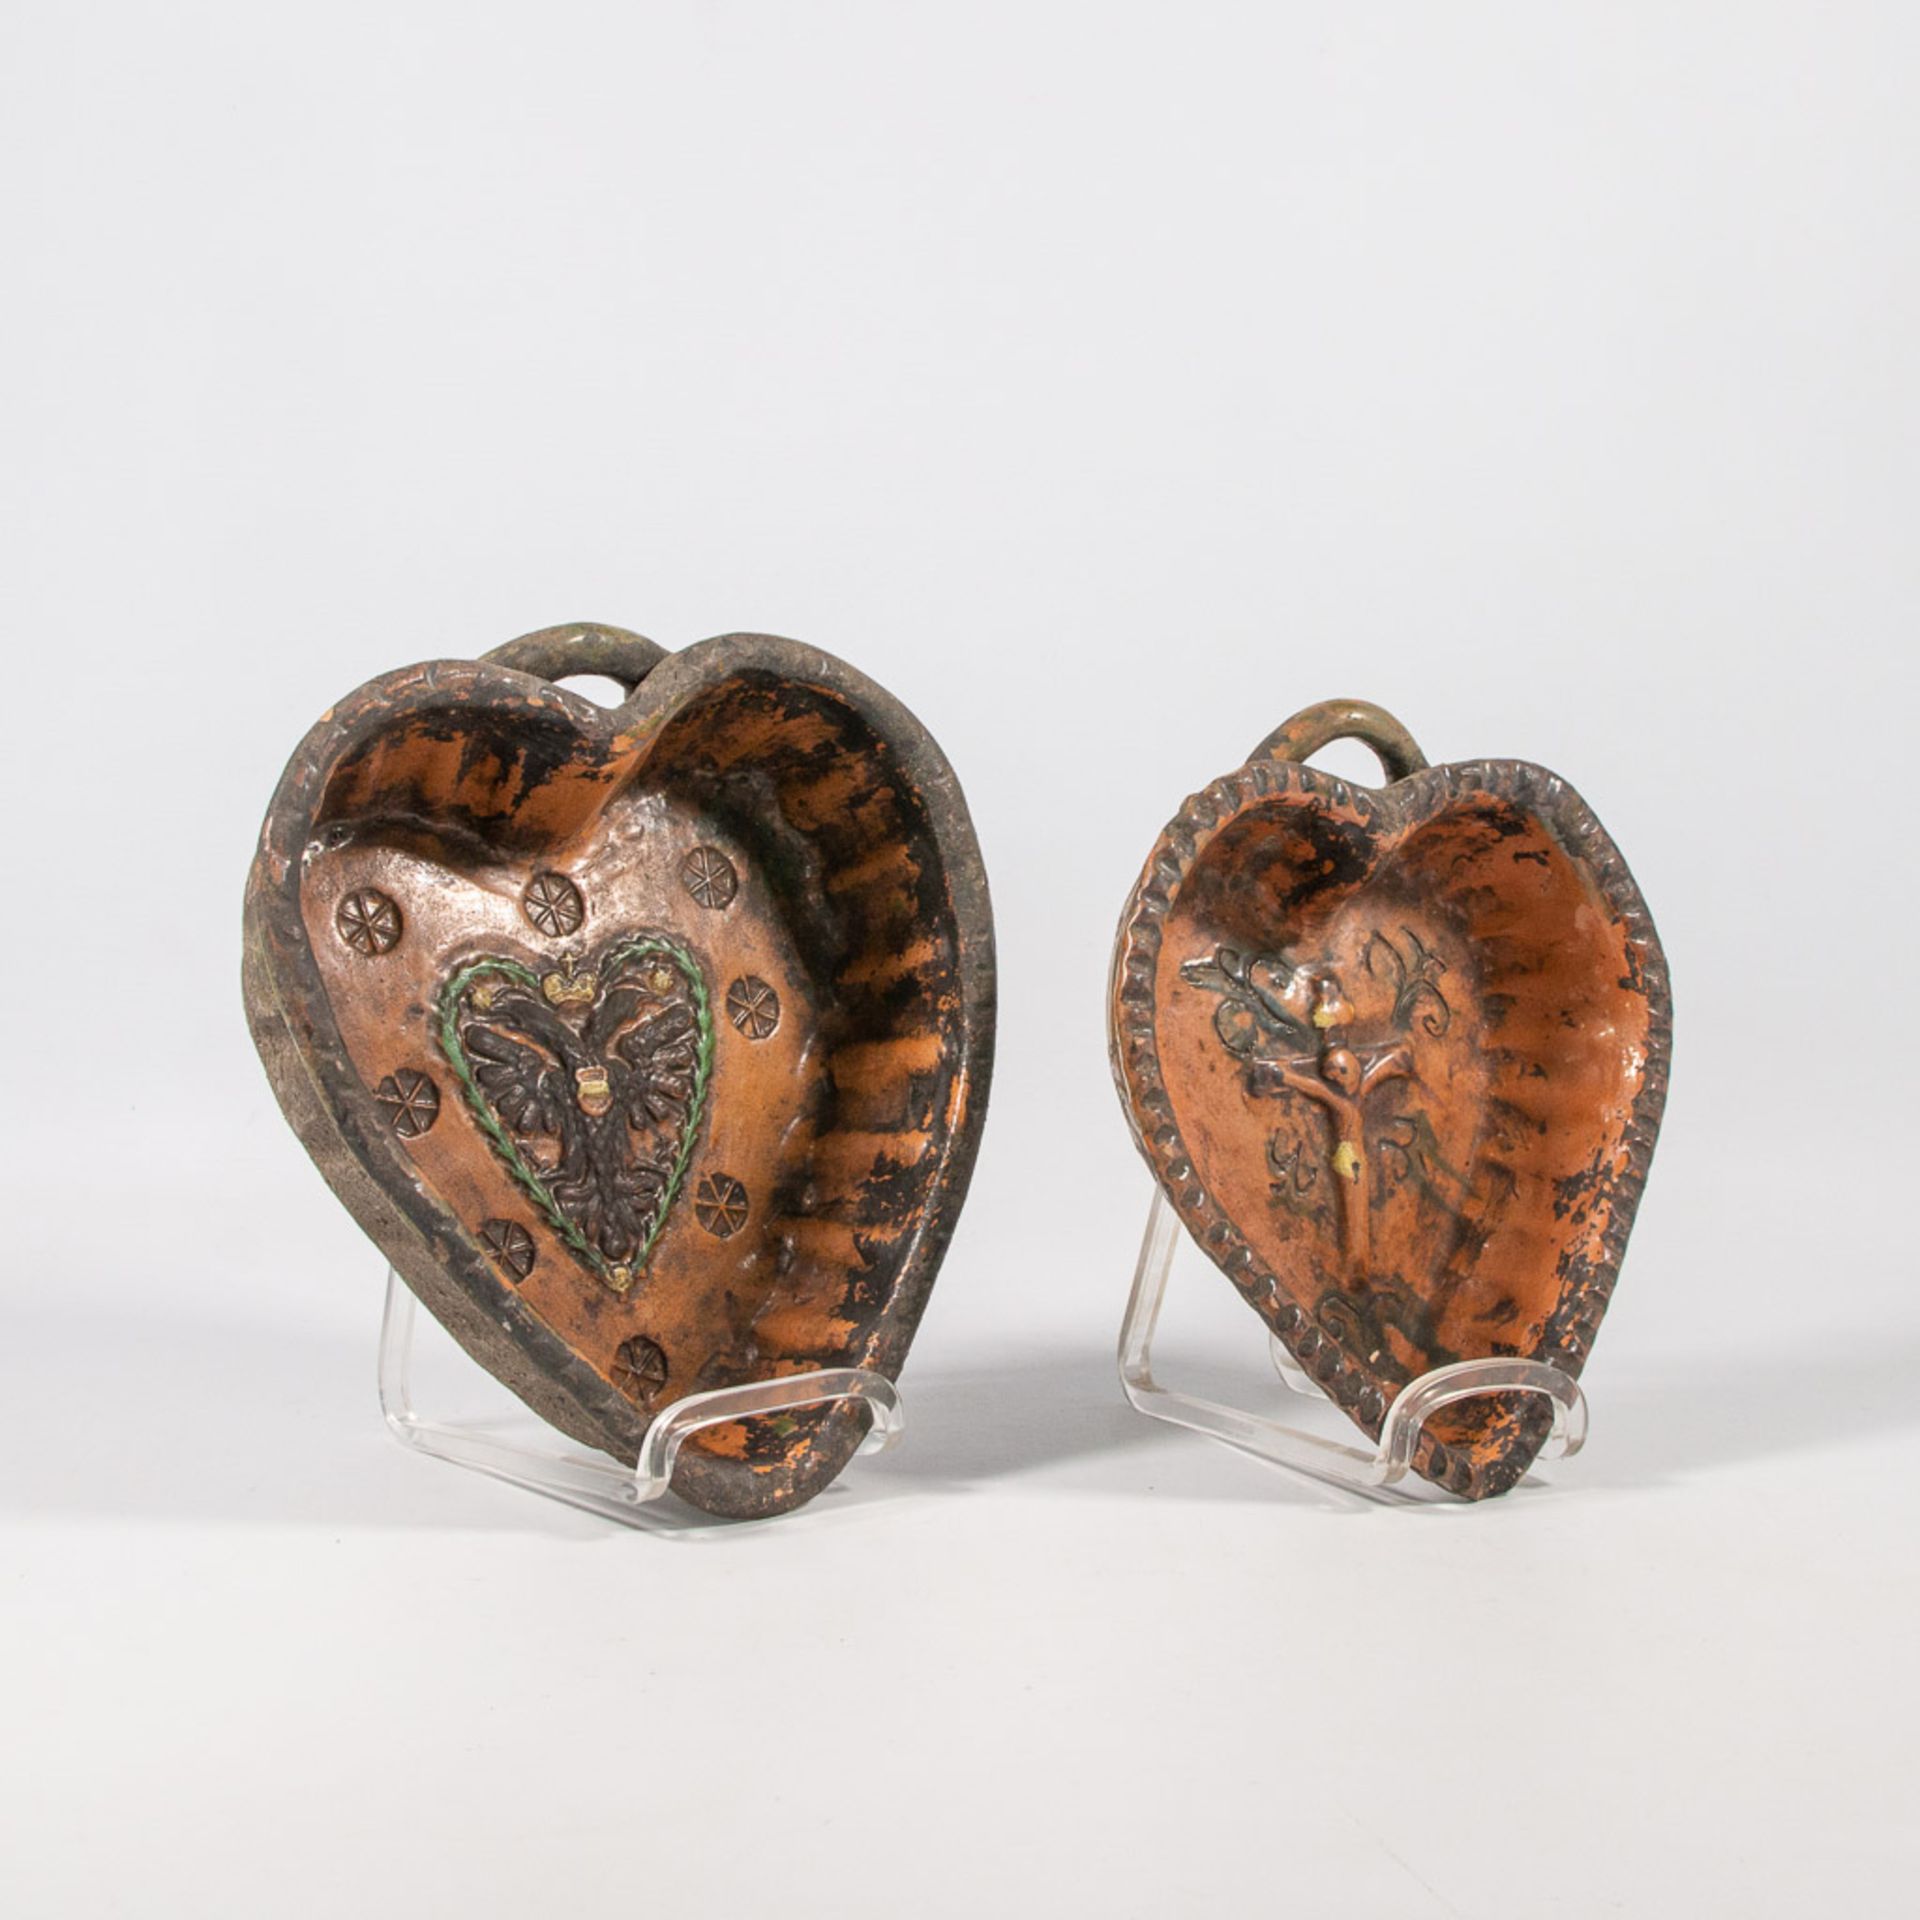 A Collection of 2 baking forms in shape of a heart - Image 10 of 27